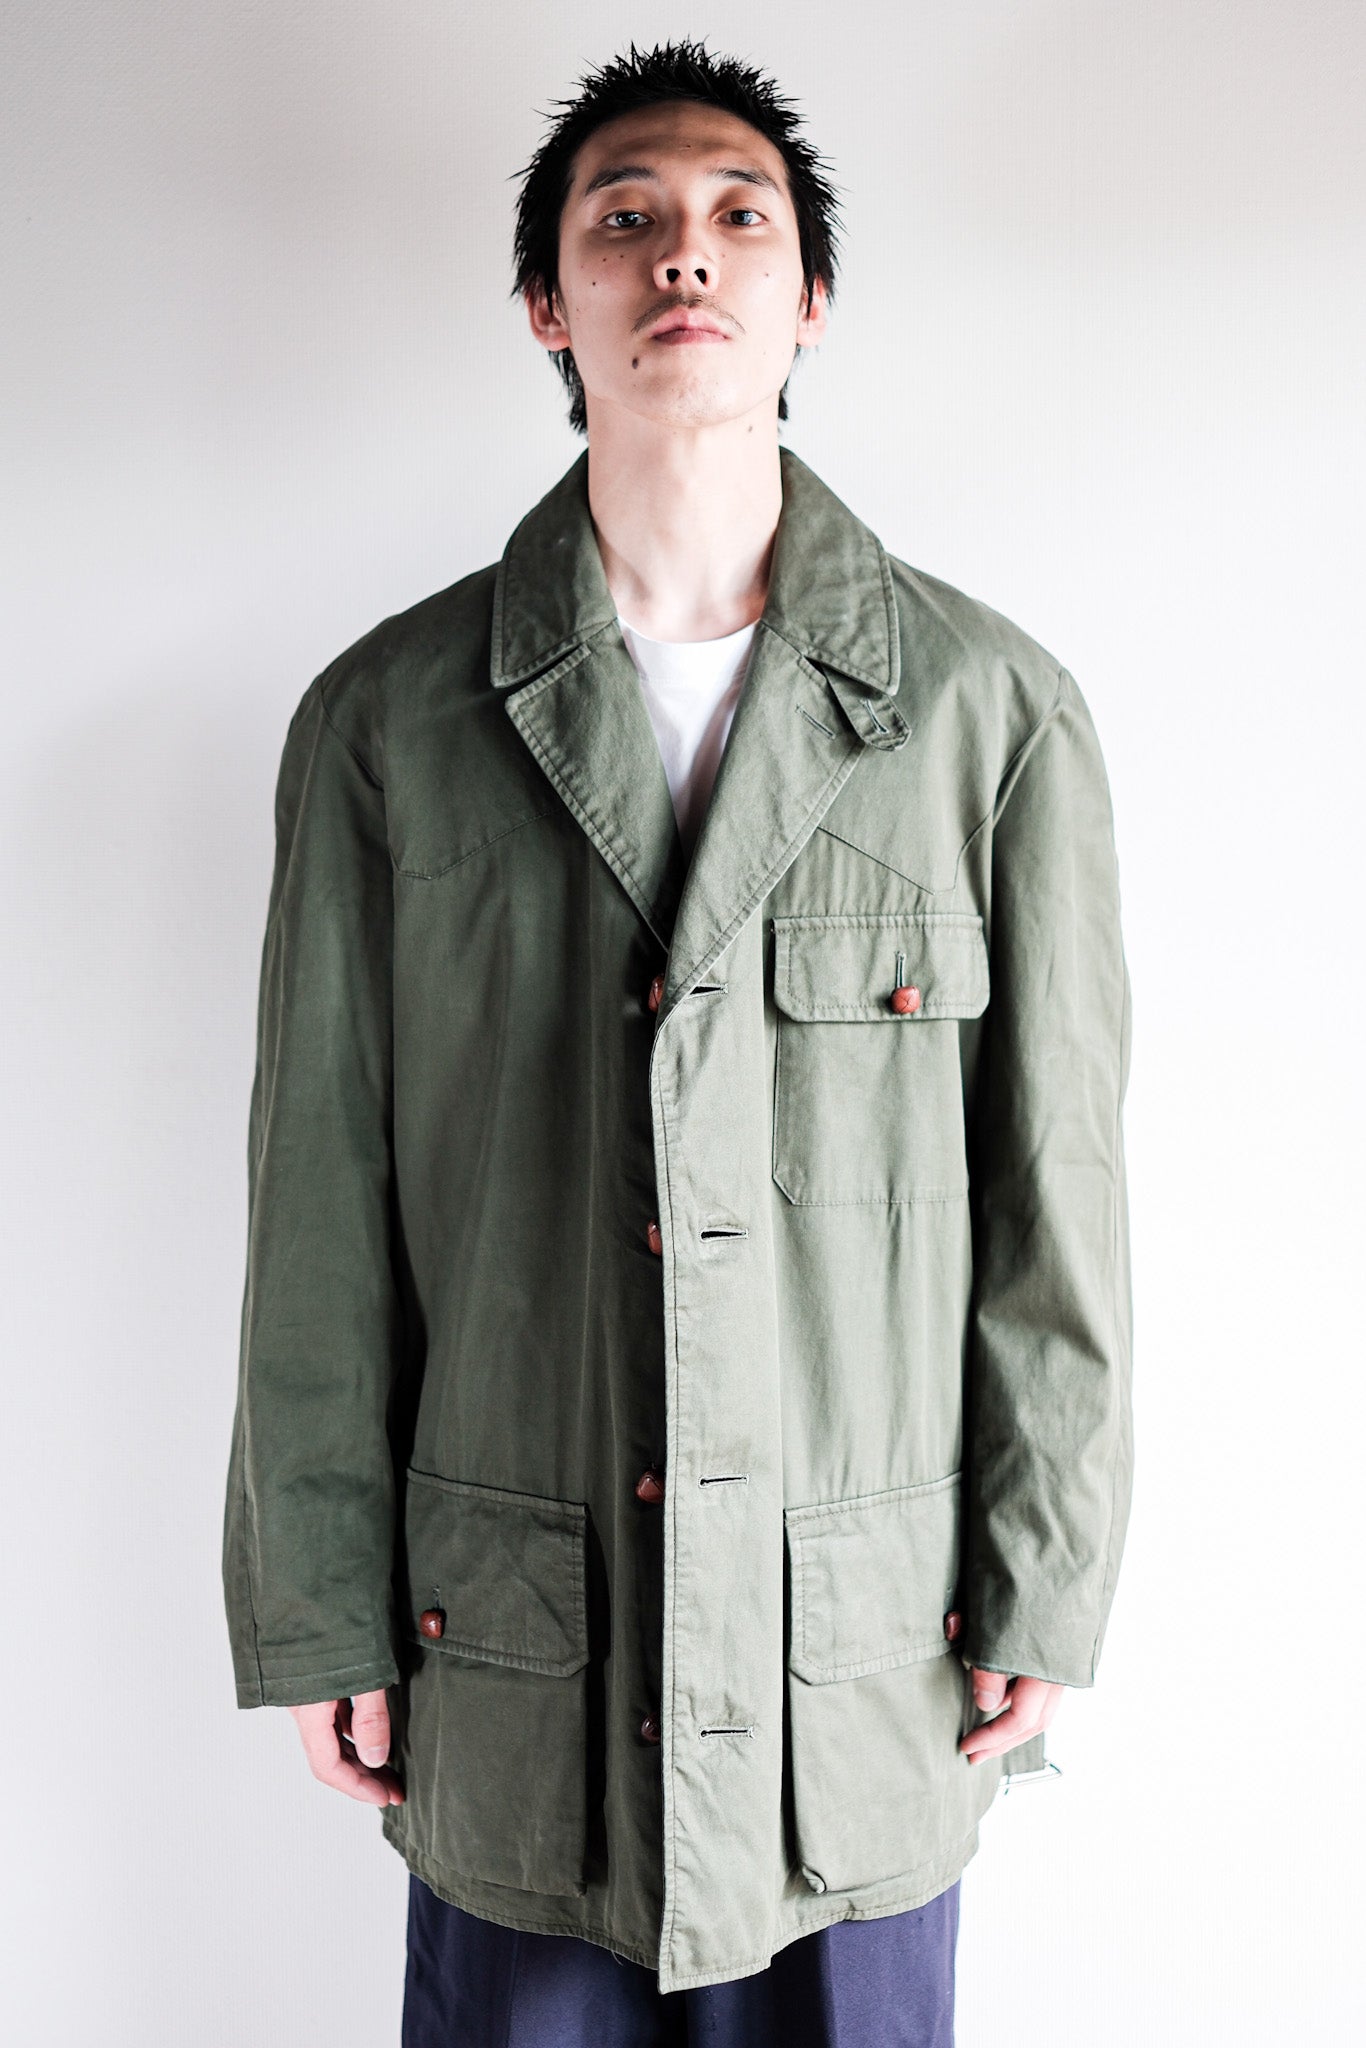 【~60’s】Vintage Grenfell Shooter Jacket Size.42 “Mountain Tag”